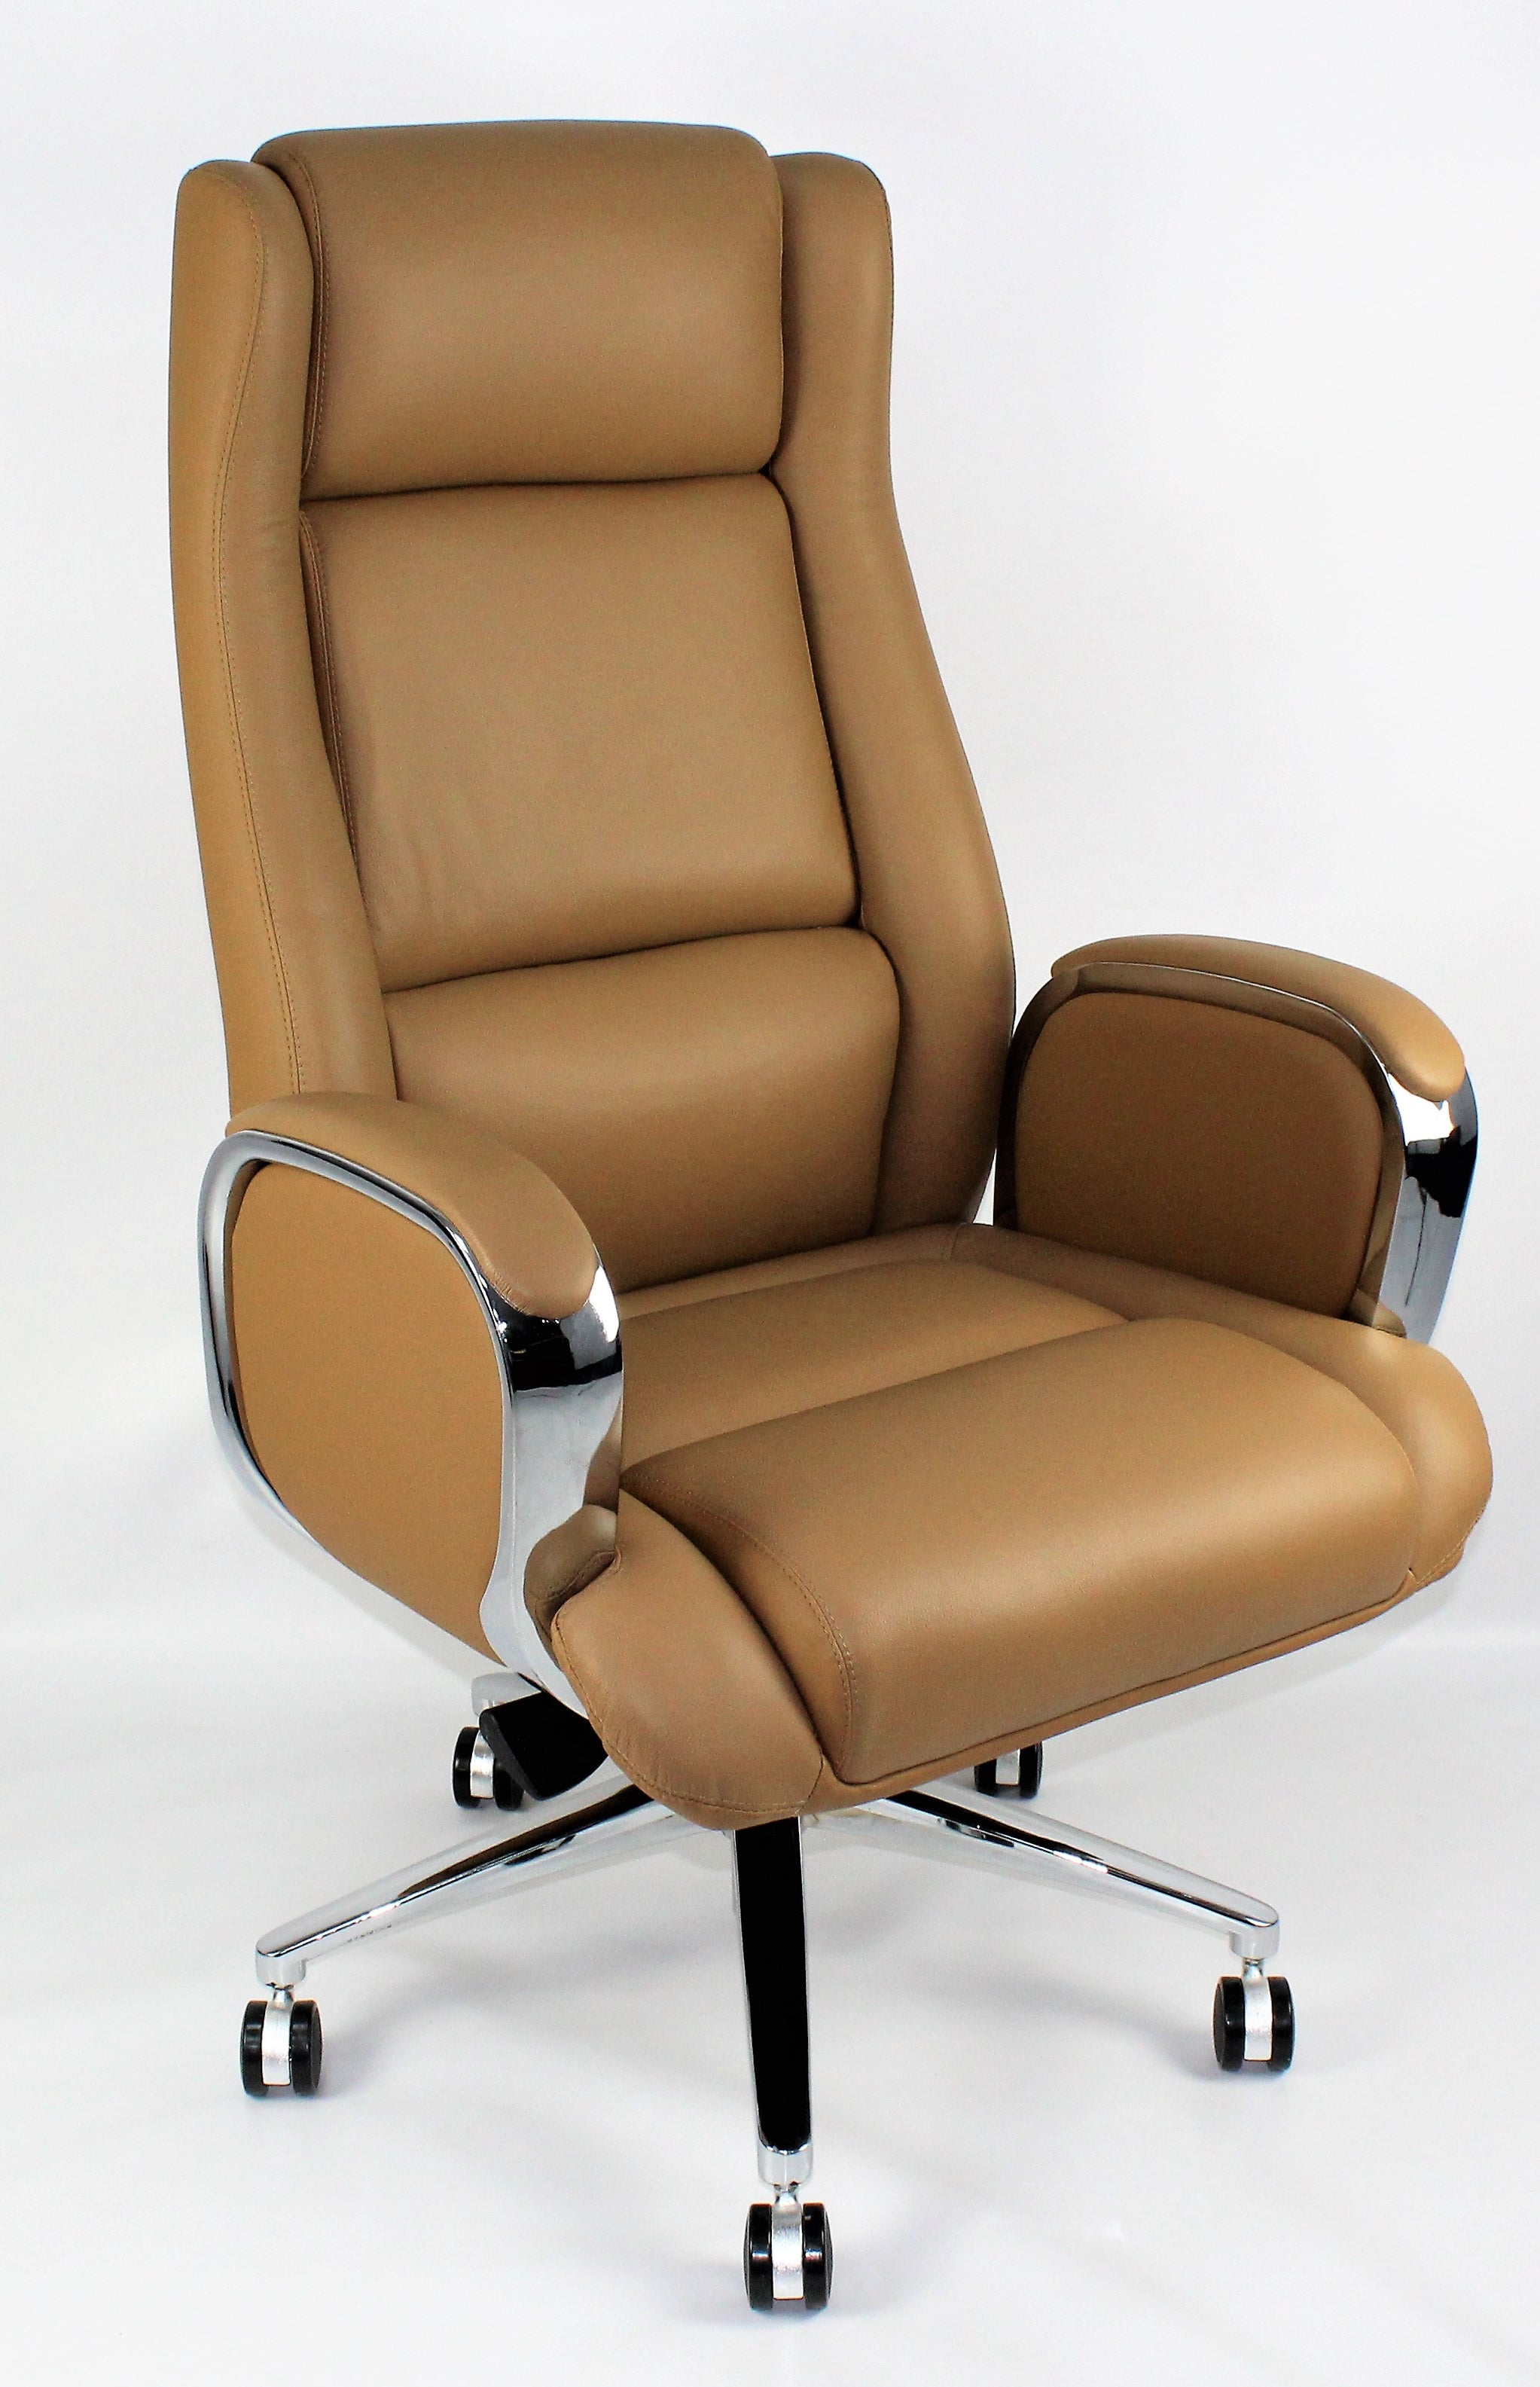 Beige Leather Executive Office Chair with Chrome Trimmed Arms - J1201